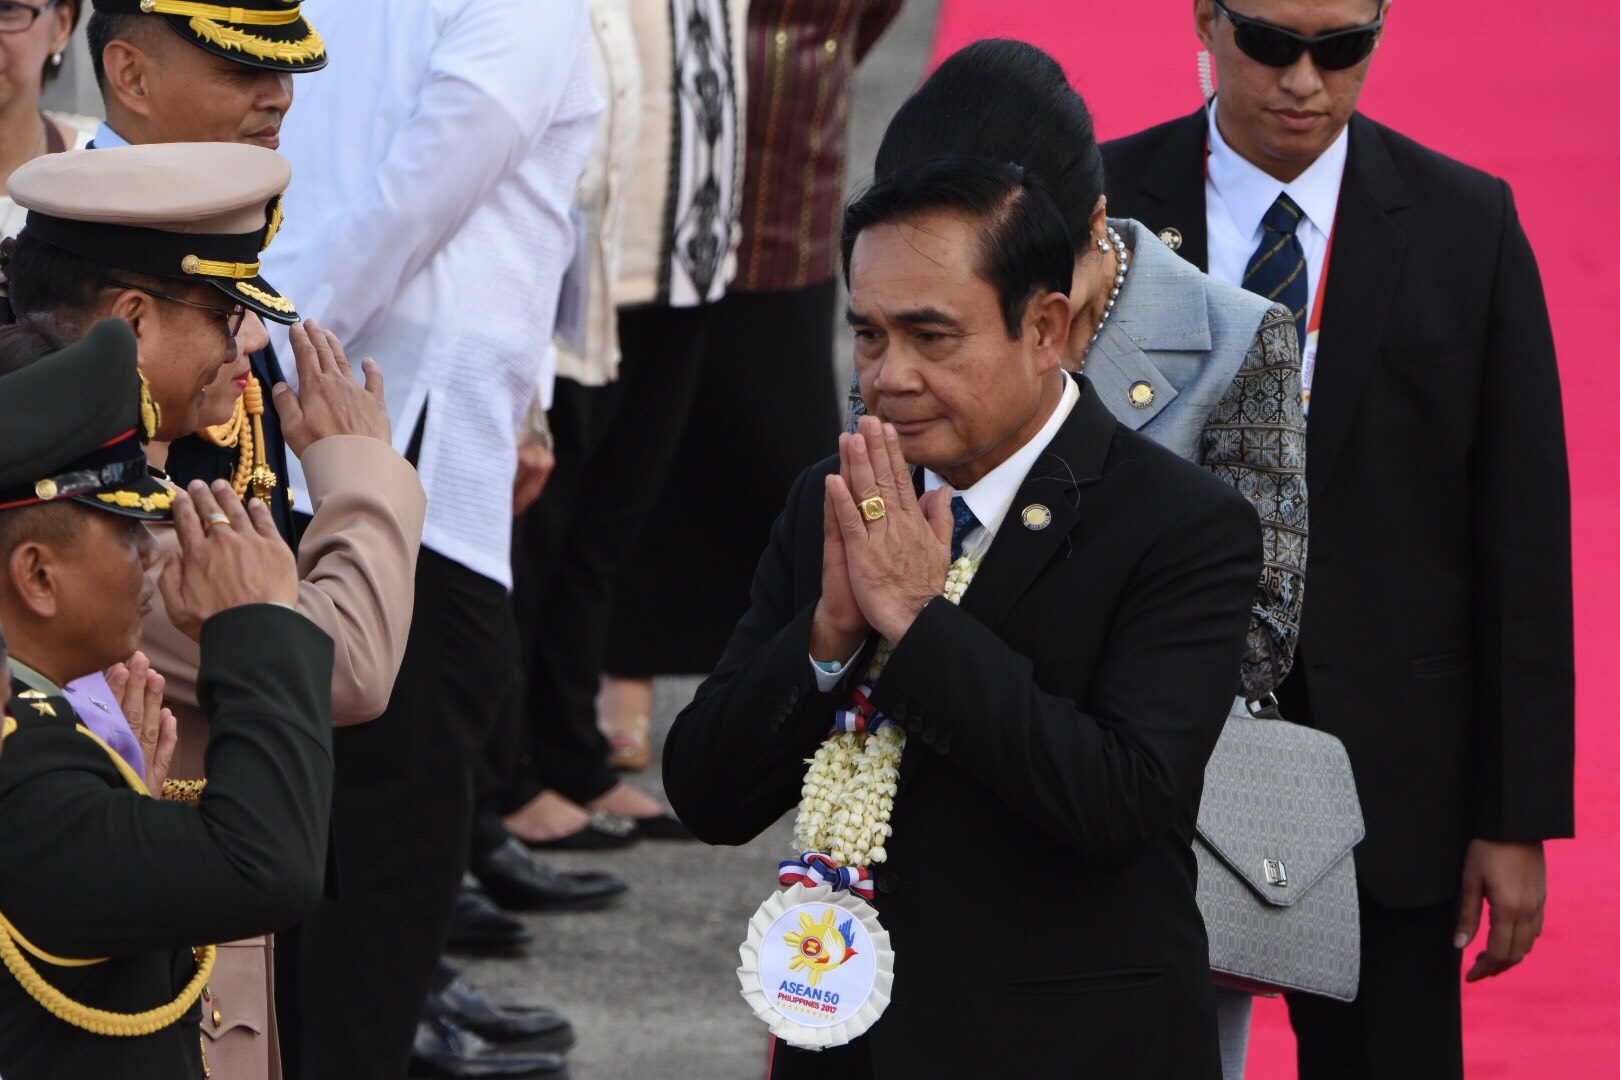 Junta chief’s bid for prime minister intact after whirlwind week in Thai politics